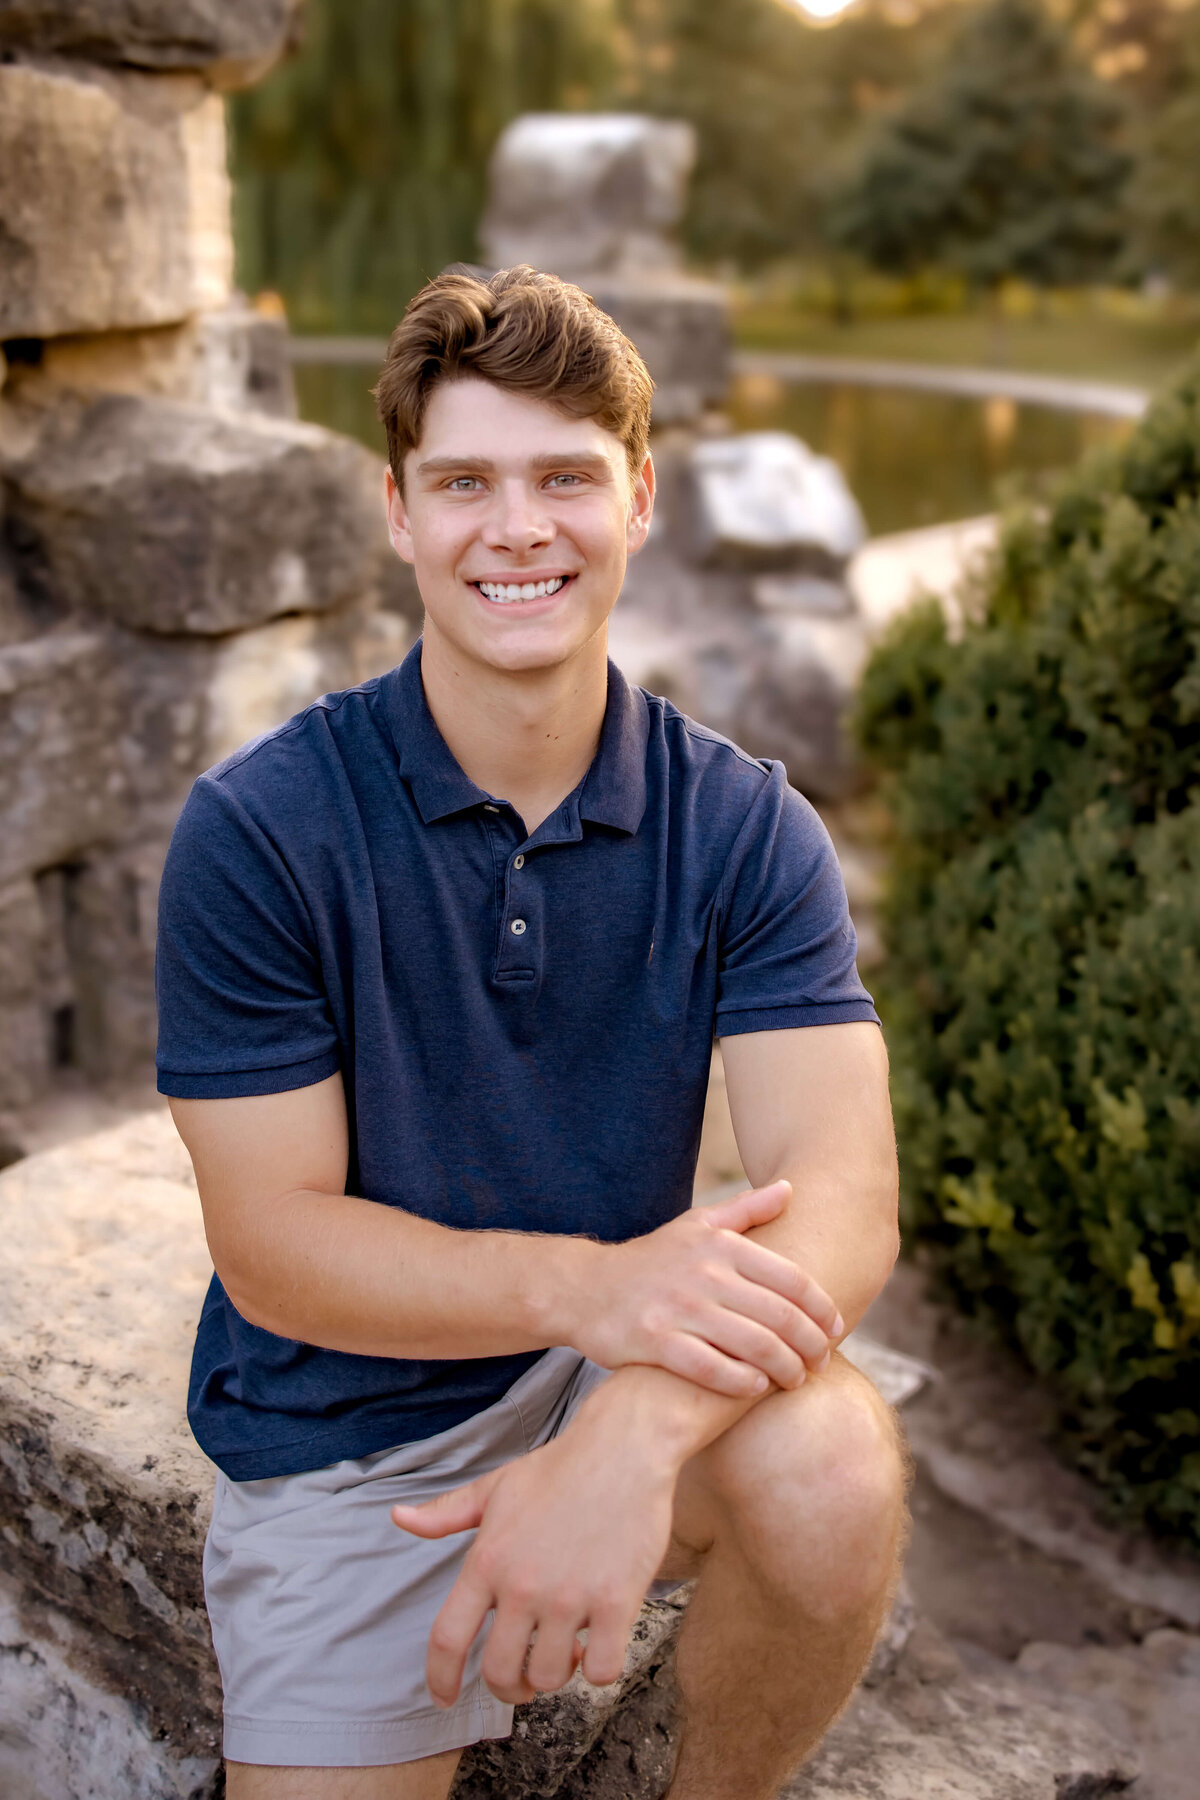 A handsome young man is posed on a stone structure in a park for his senior portraits.